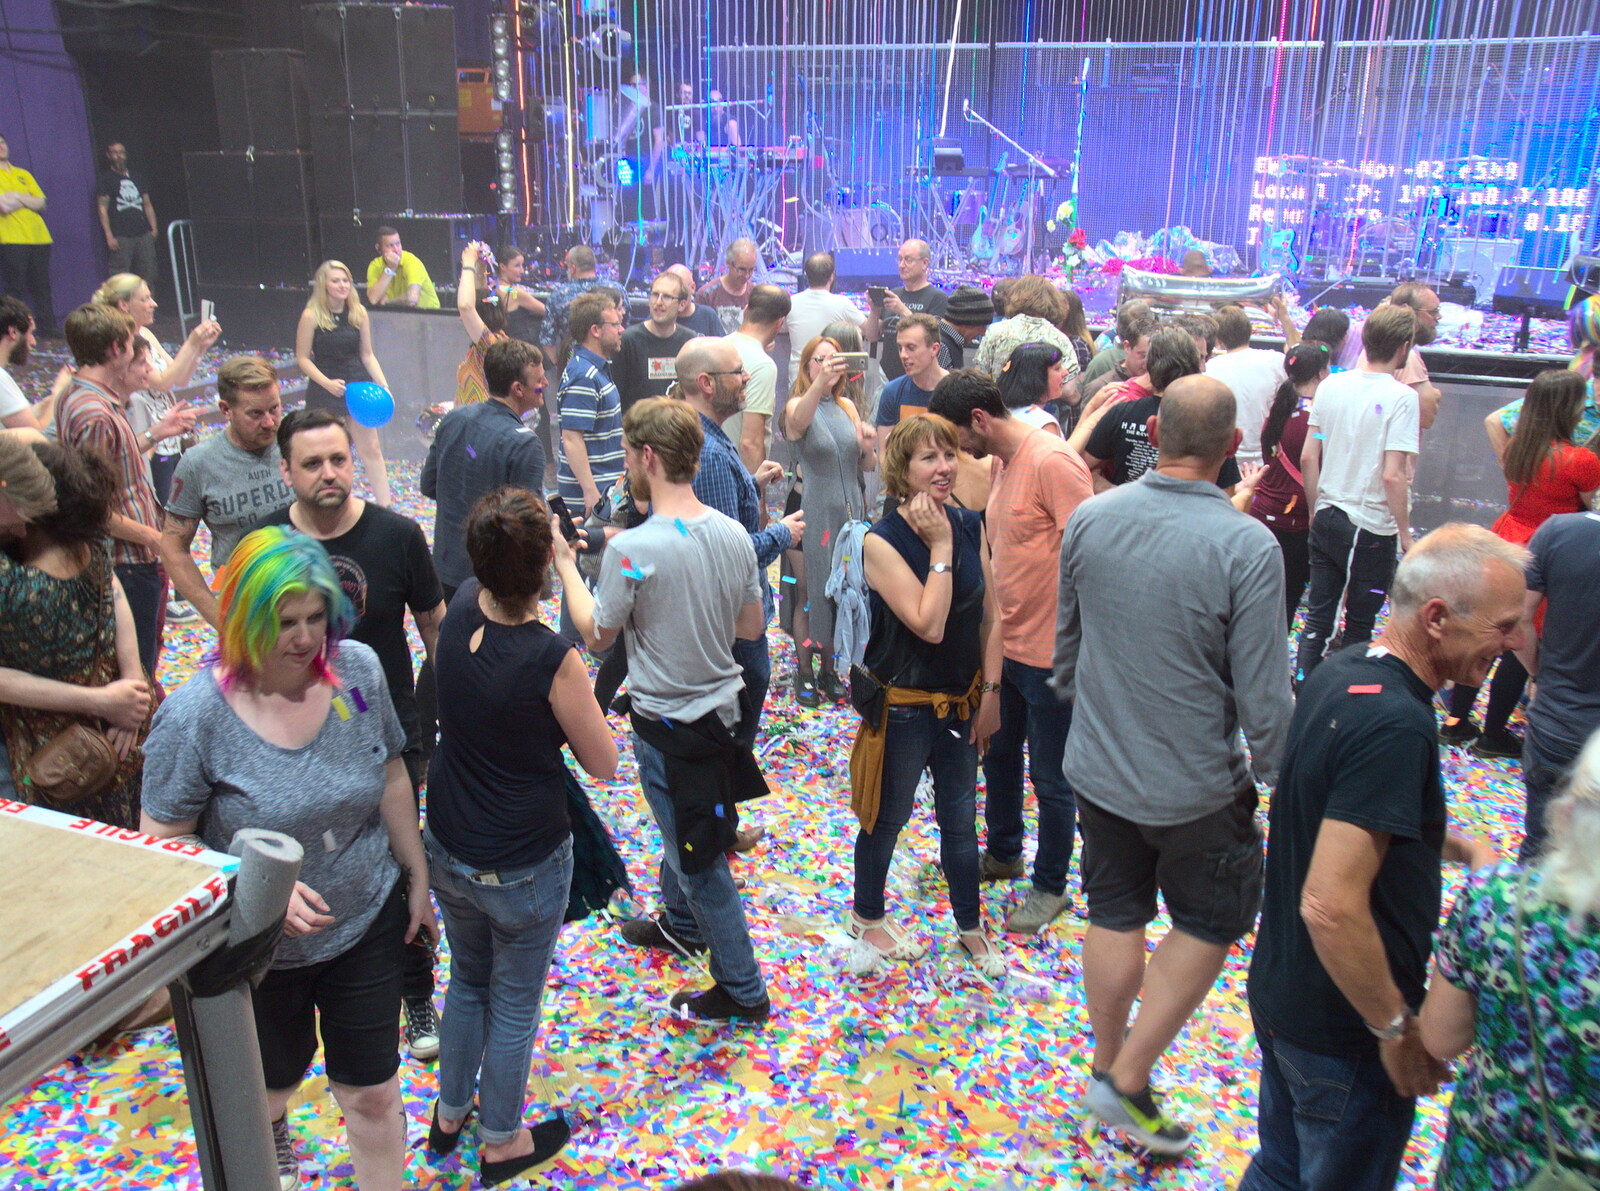 There's confetti all over the floor from Flaming Lips at the UEA, Norwich, Norfolk - 26th June 2017